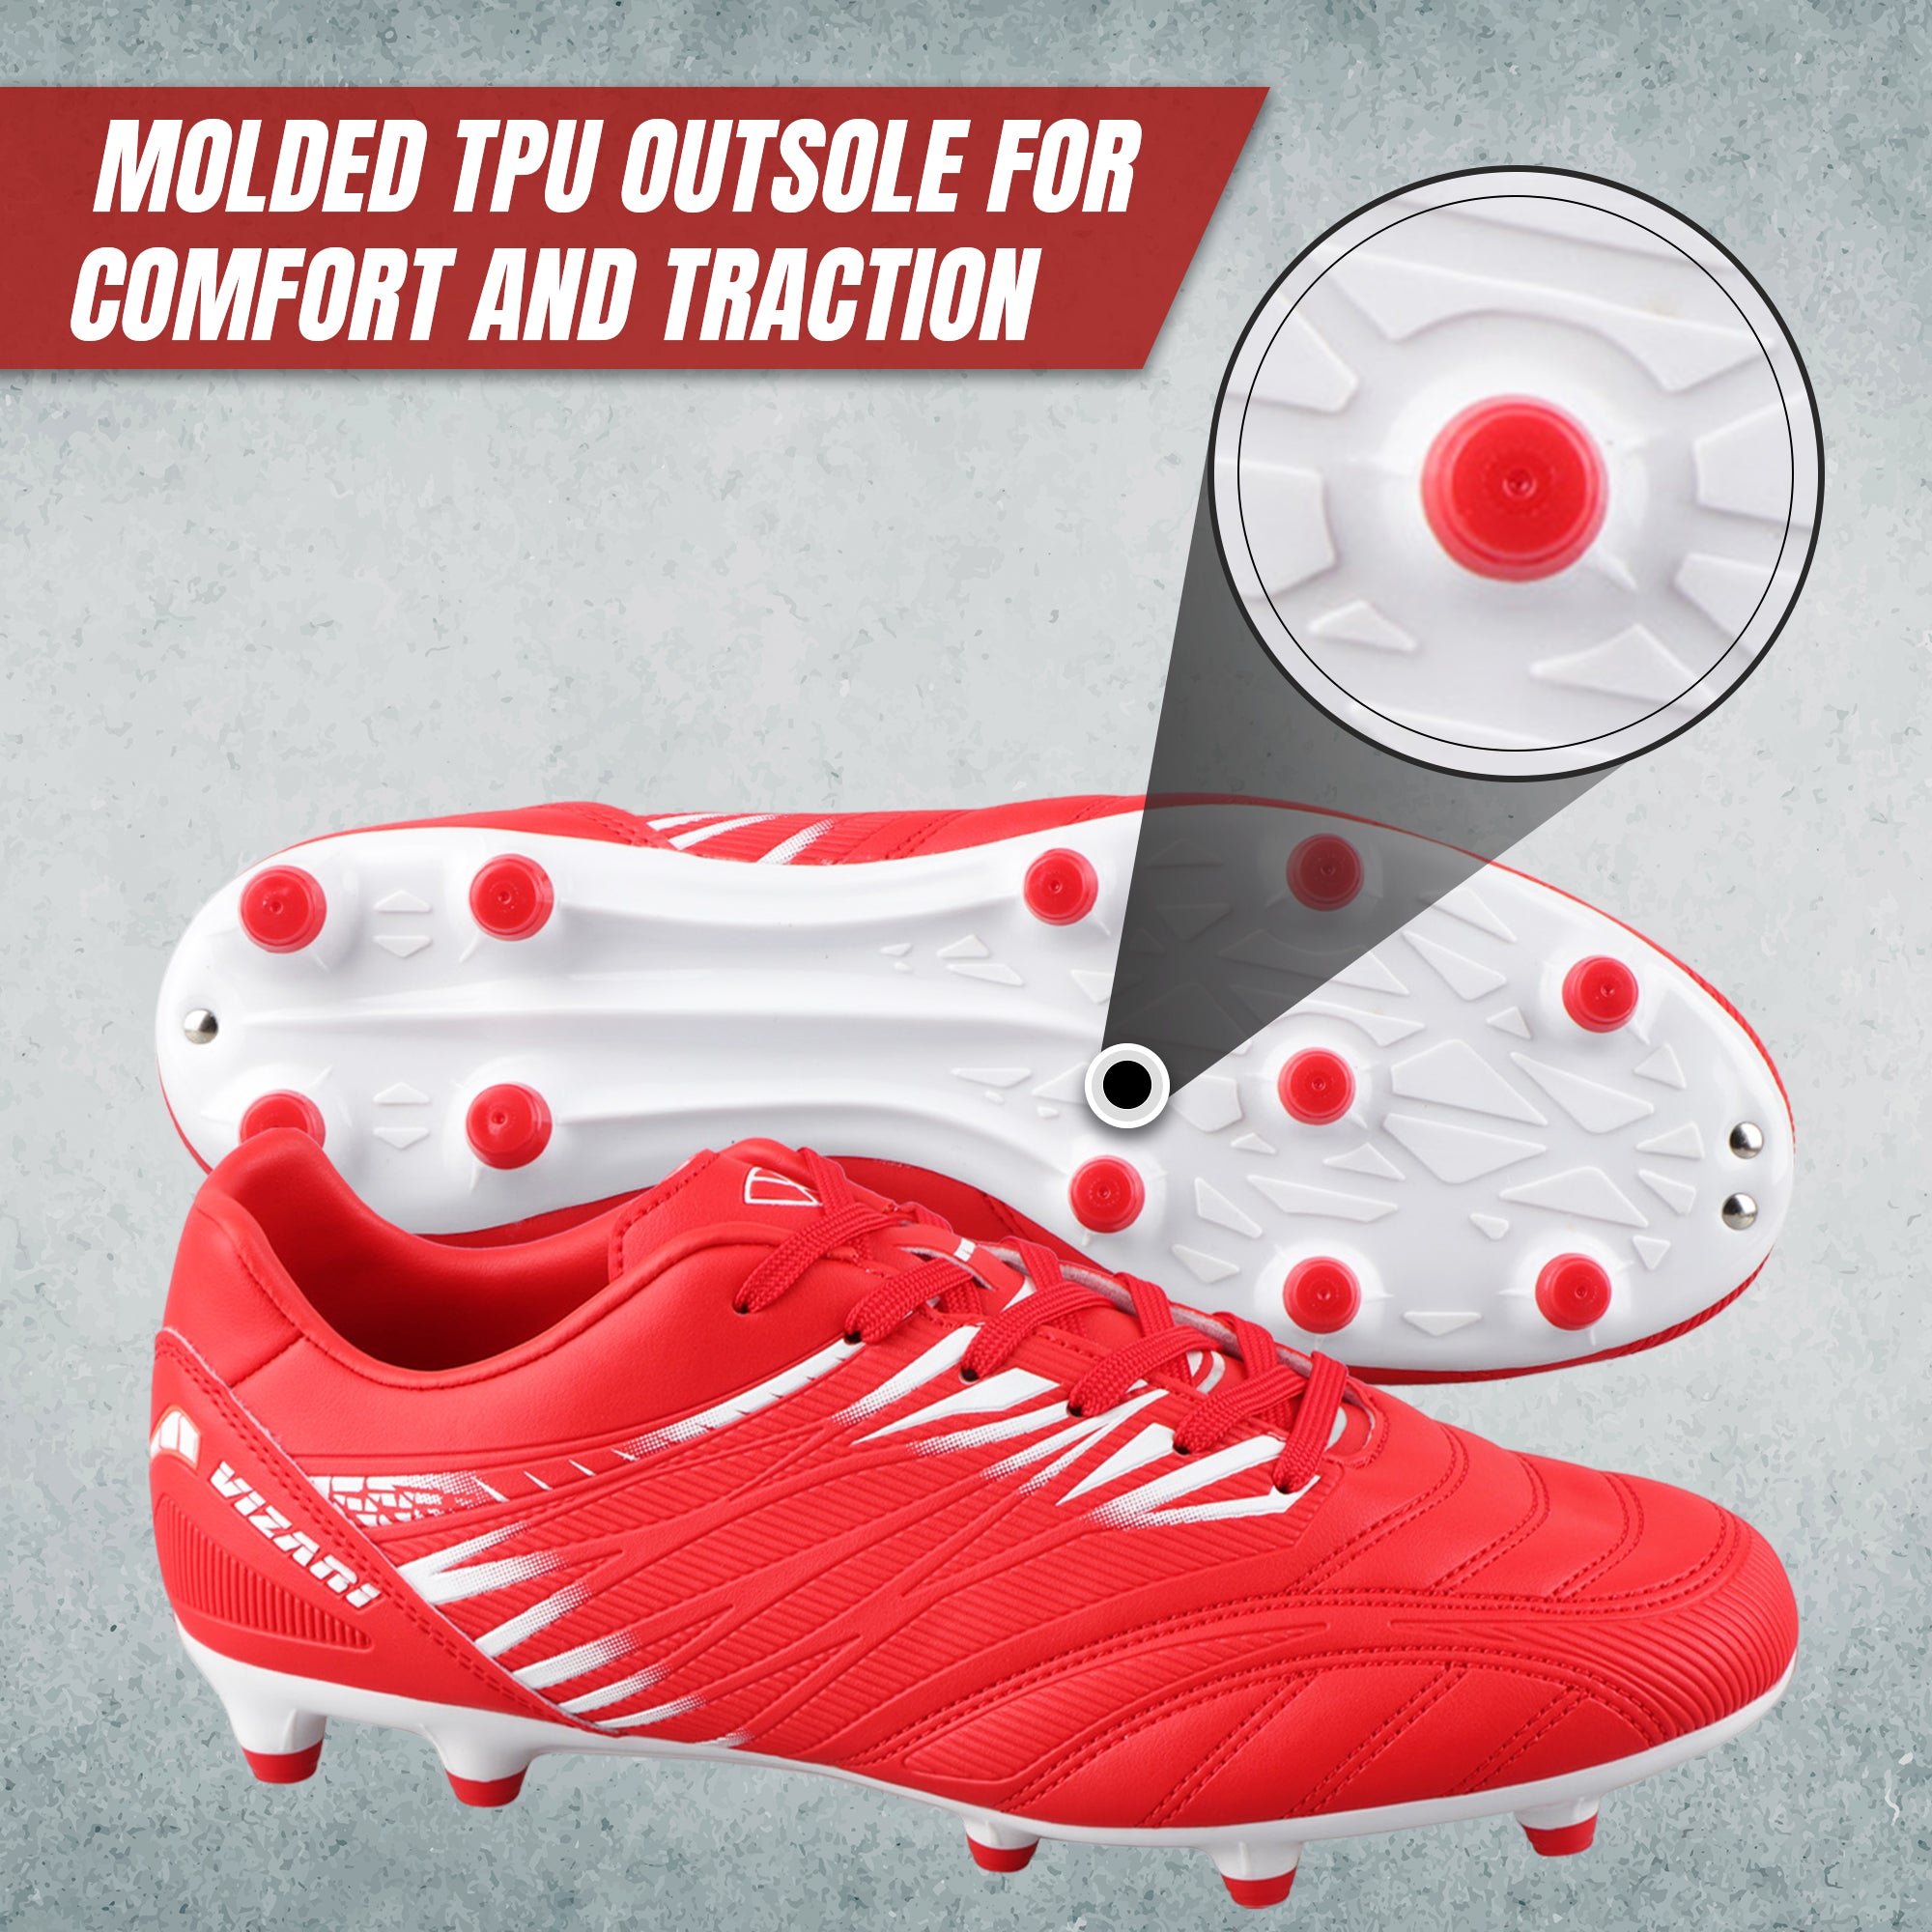 Valencia Firm Ground Soccer Cleats - Red/White